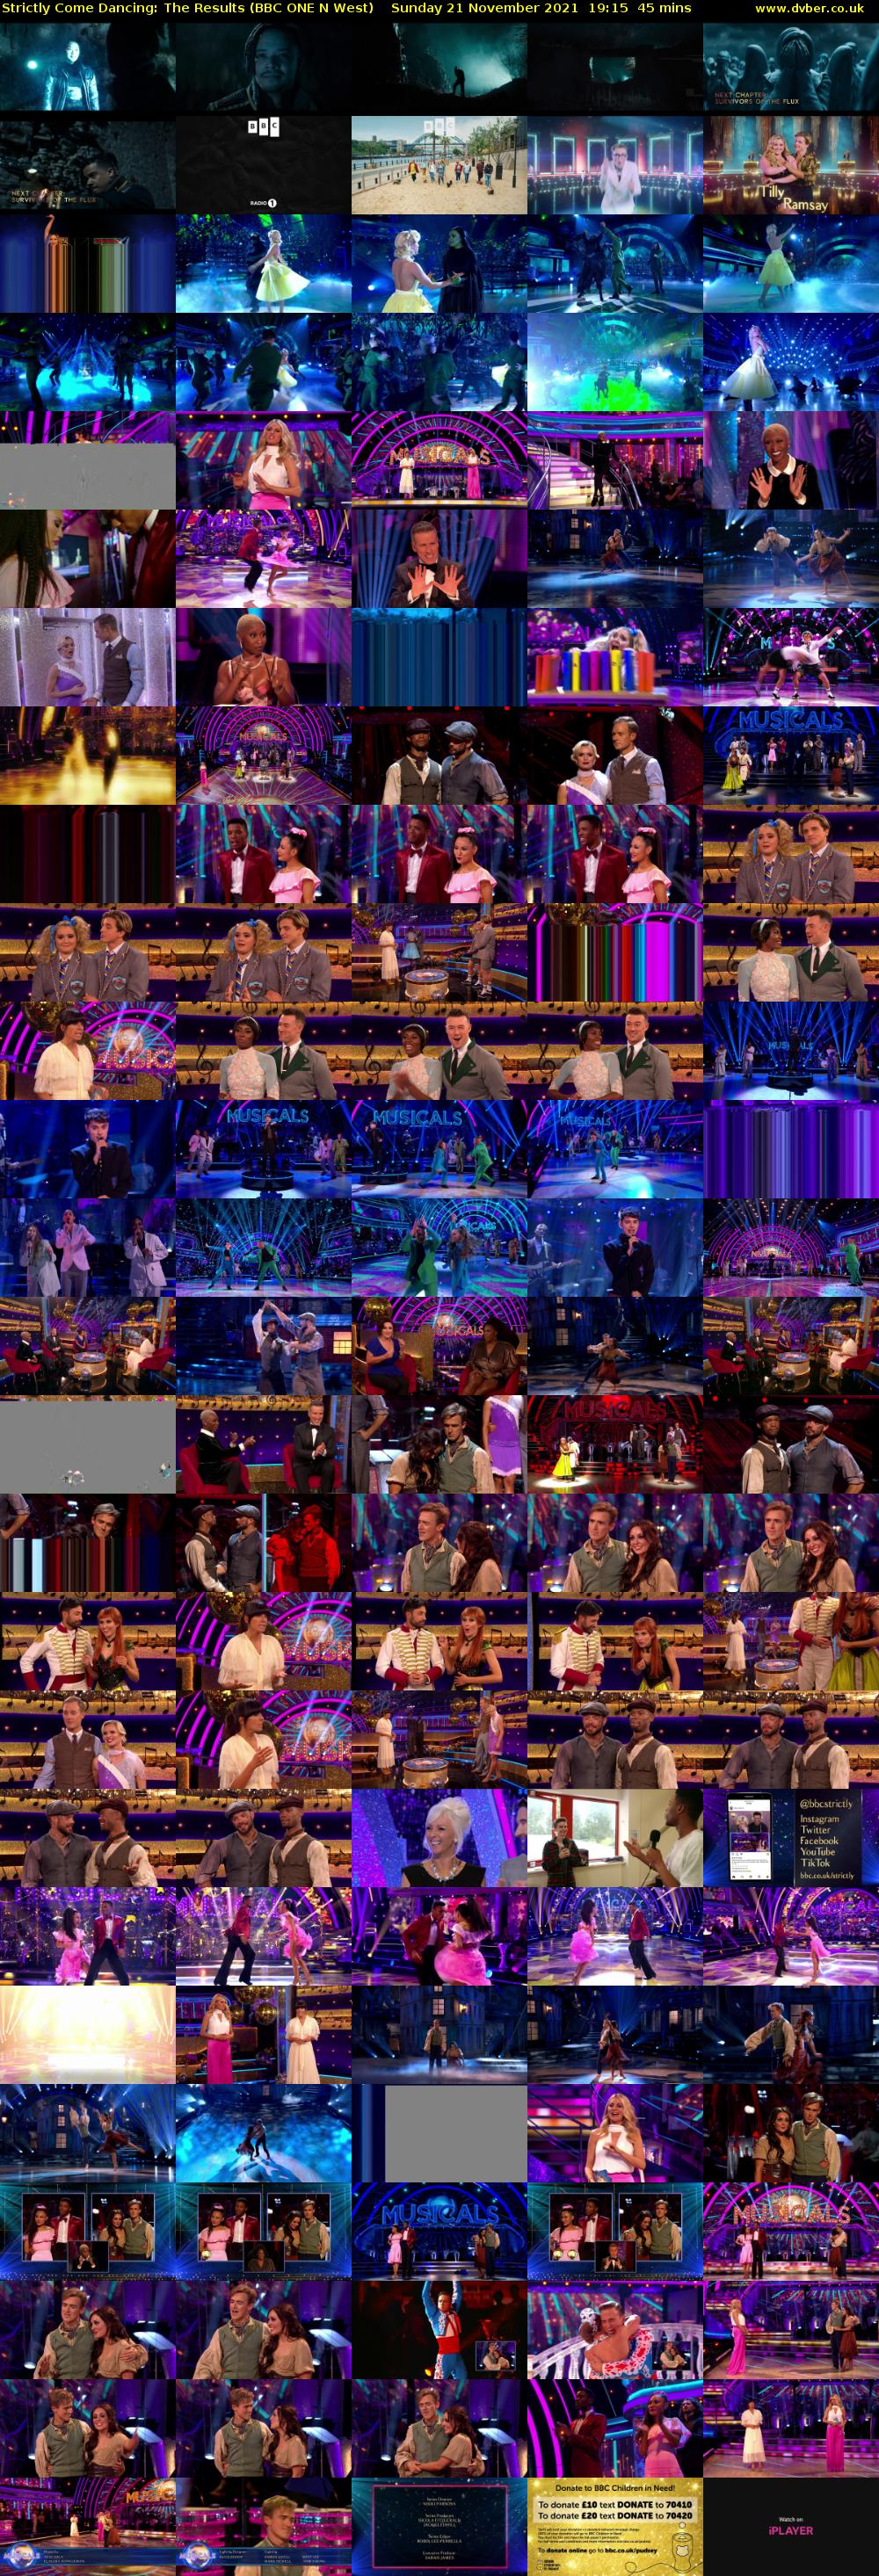 Strictly Come Dancing: The Results (BBC ONE N West) Sunday 21 November 2021 19:15 - 20:00